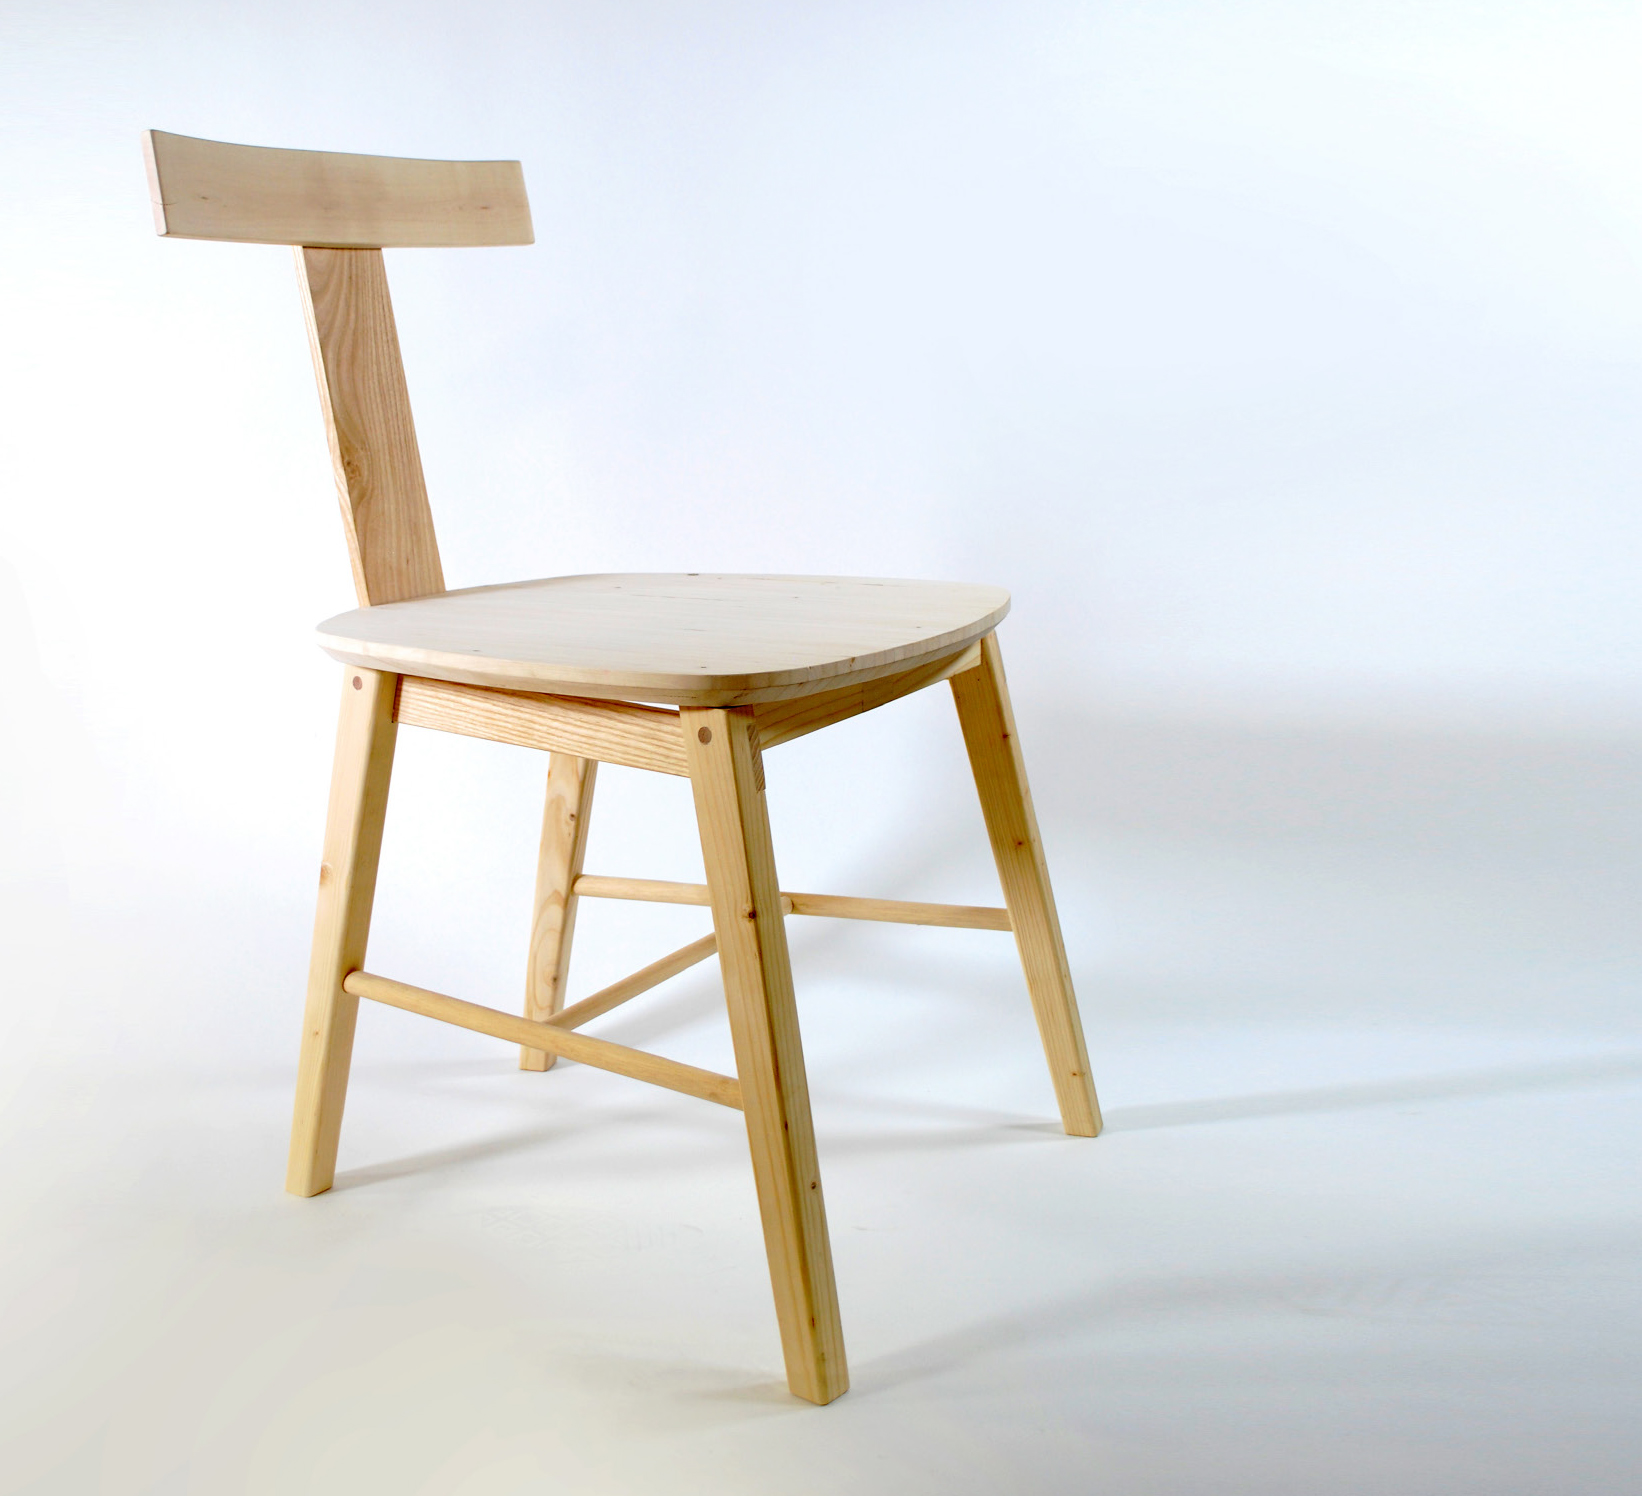 Oliver Priest - Shaker Chair